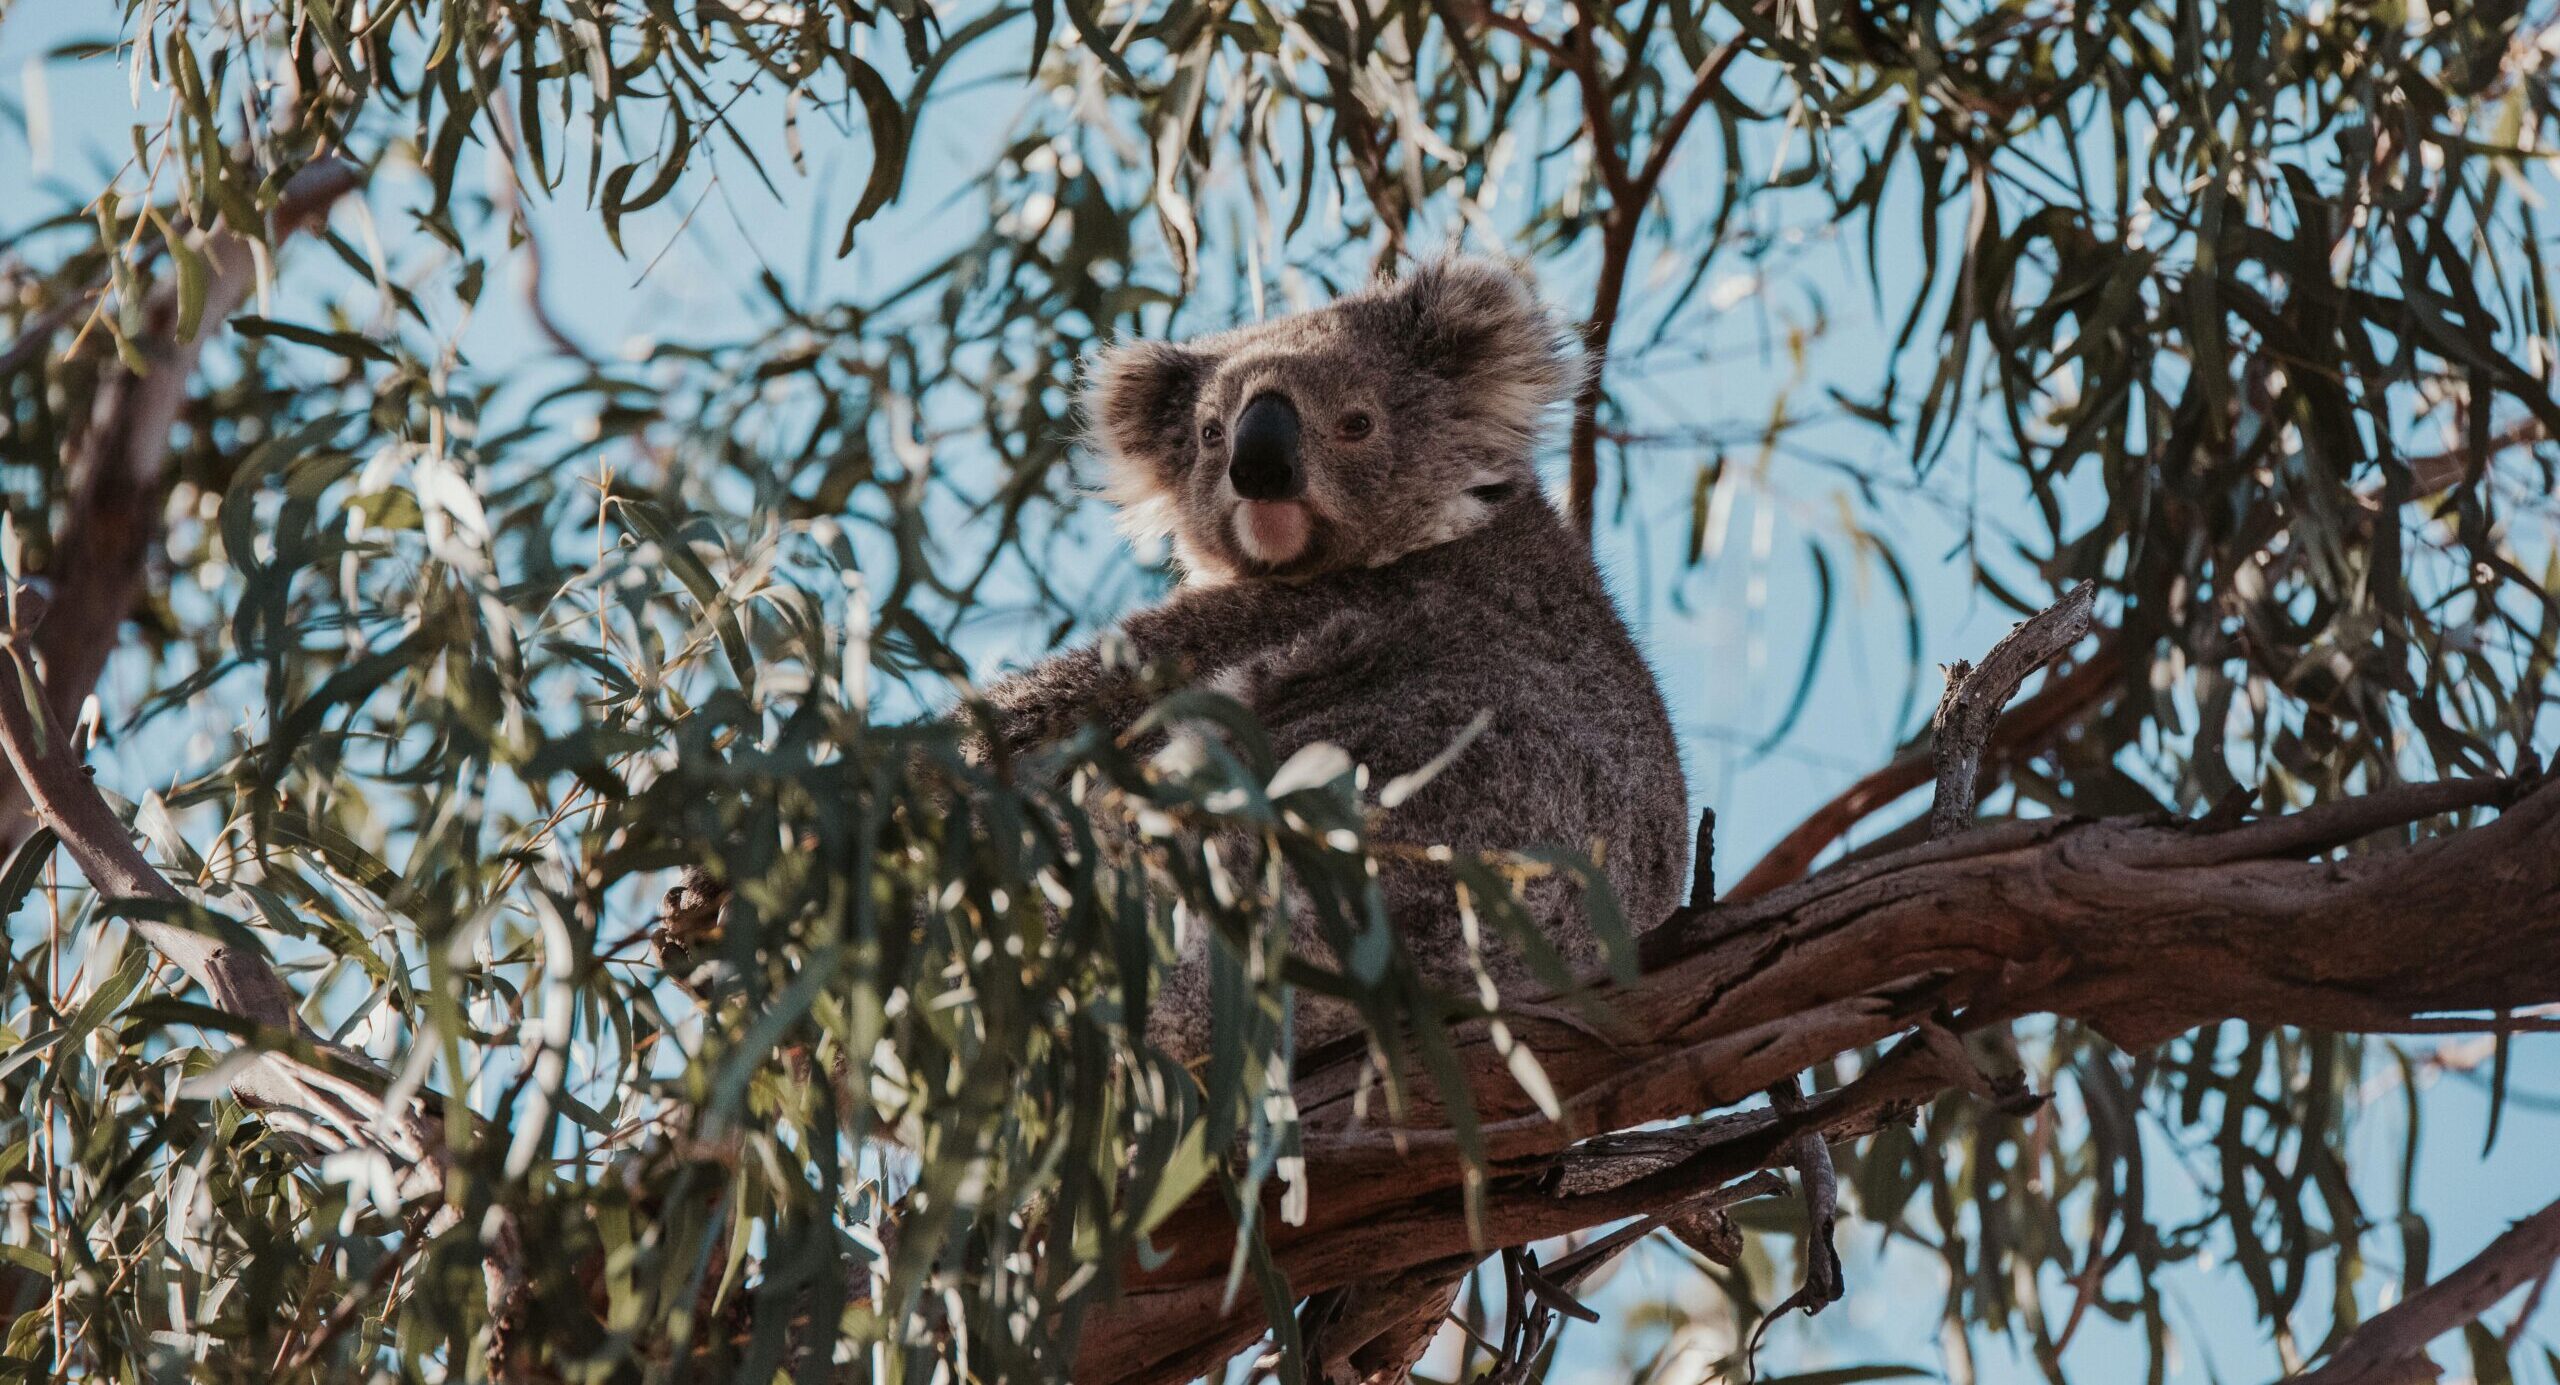 Koala in a tree at a planting site